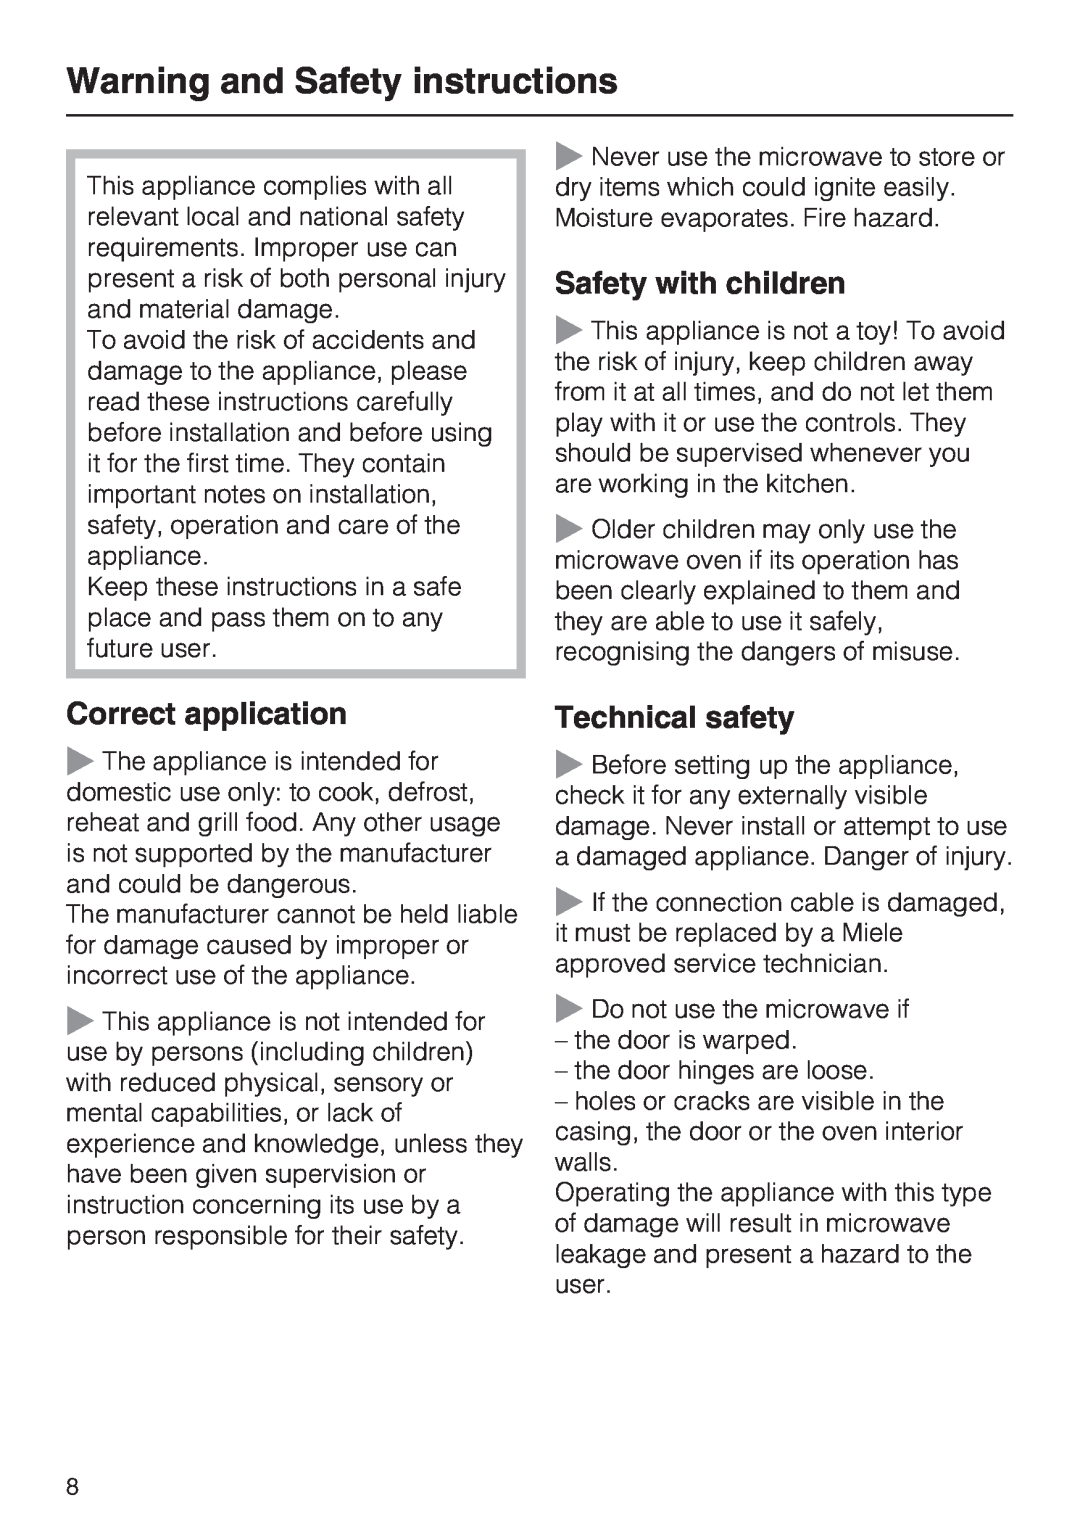 Miele M 8261-1 manual Warning and Safety instructions, Safety with children, Correct application, Technical safety 